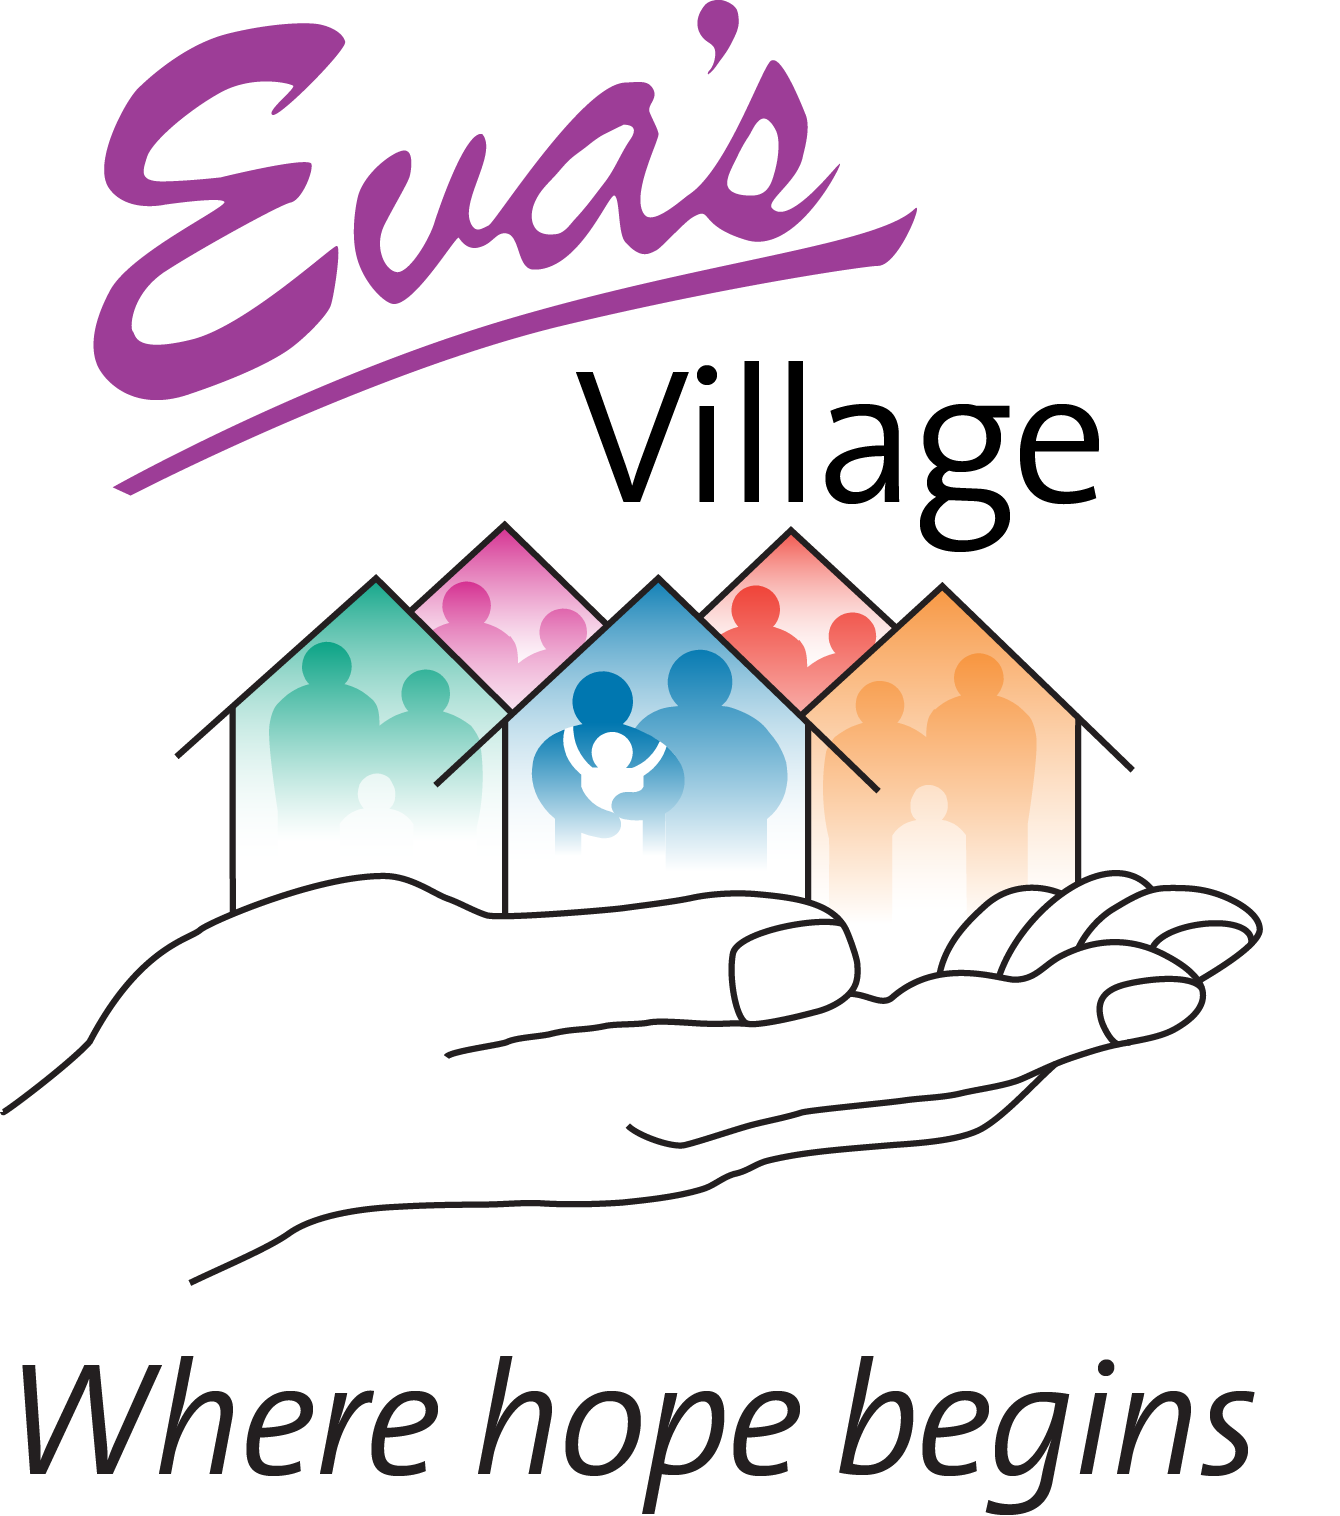 The mission of Eva’s Village is to provide care and support for people who are struggling with poverty, hunger, homelessness, and addiction.